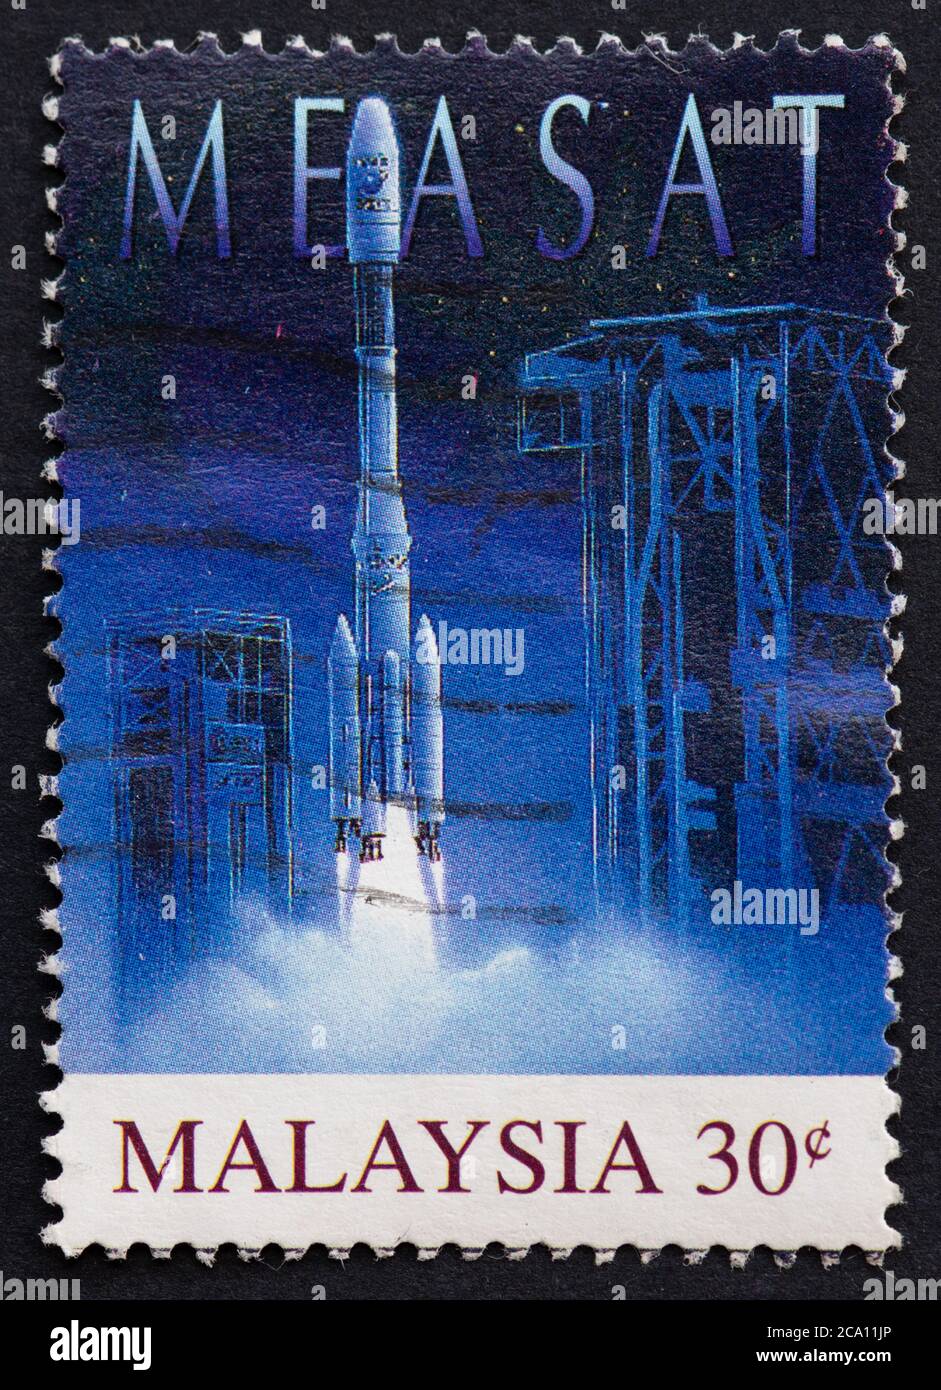 MEASAT - Malaysia East Asia satellite - 30 c affranchissement Timbre - Malaisie 1996 Banque D'Images